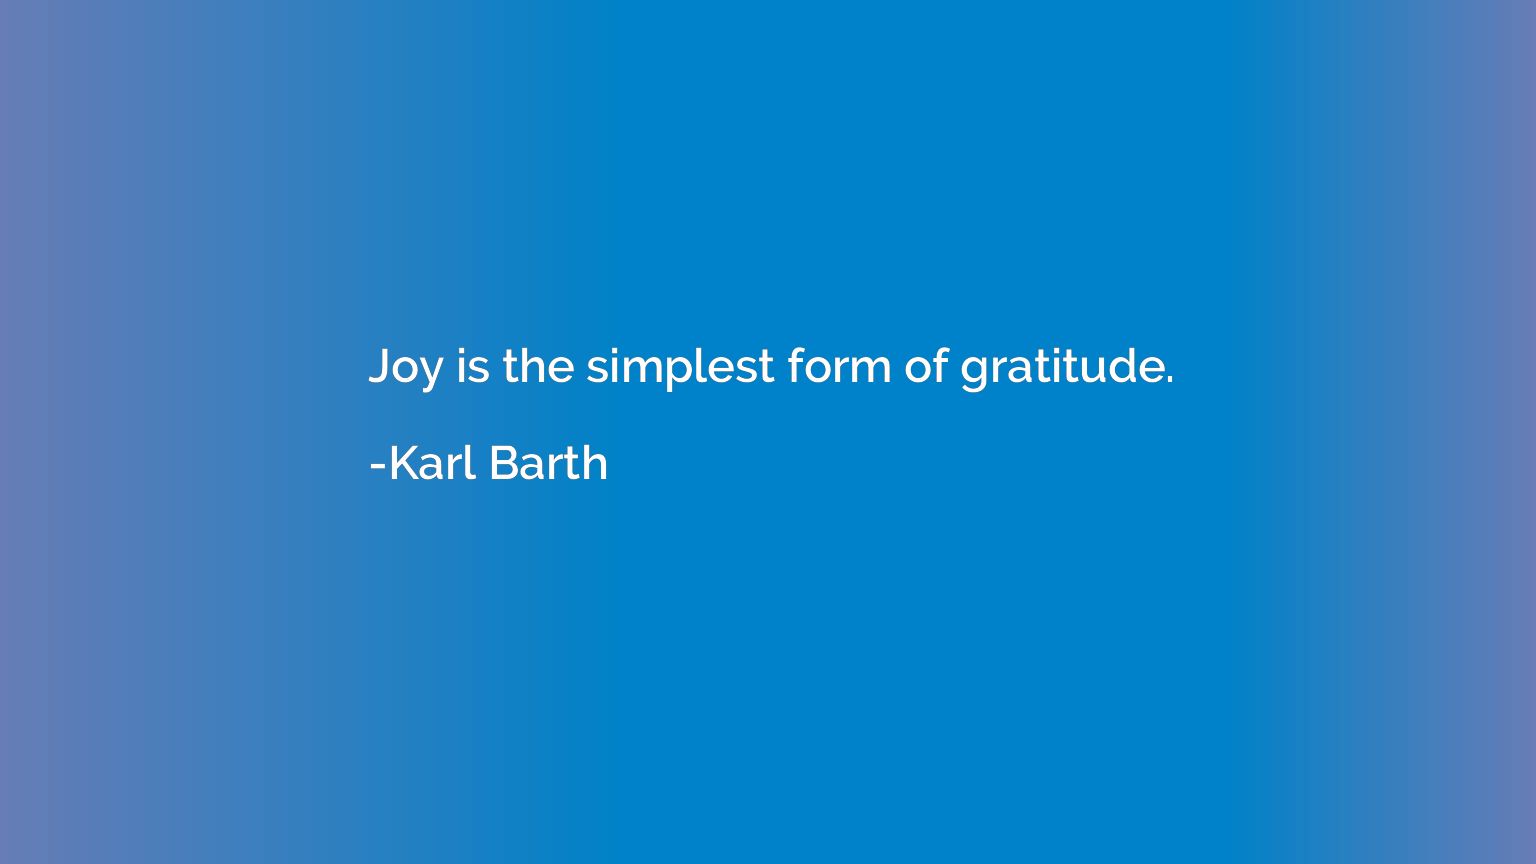 Joy is the simplest form of gratitude.